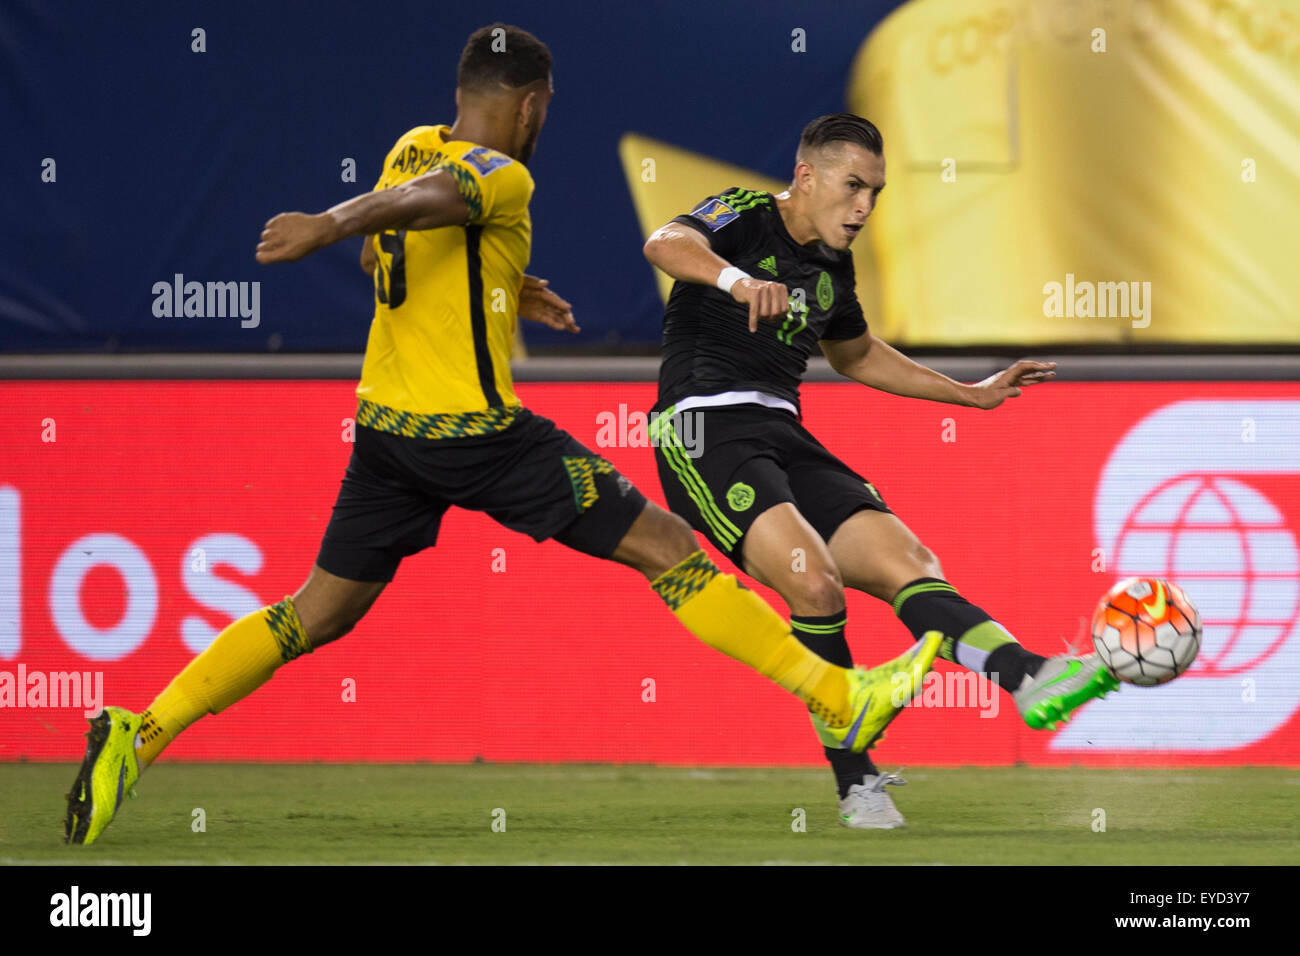 July 26, 2015: Mexico midfielder Jorge Torres Nilo (17) kicks the ball away from Jamaica defender Adrian Mariappa (19) during the CONCACAF Gold Cup 2015 Final match between Jamaica and Mexico at Lincoln Financial Field in Philadelphia, Pennsylvania. Mexico won 3-1. Christopher Szagola/CSM Stock Photo